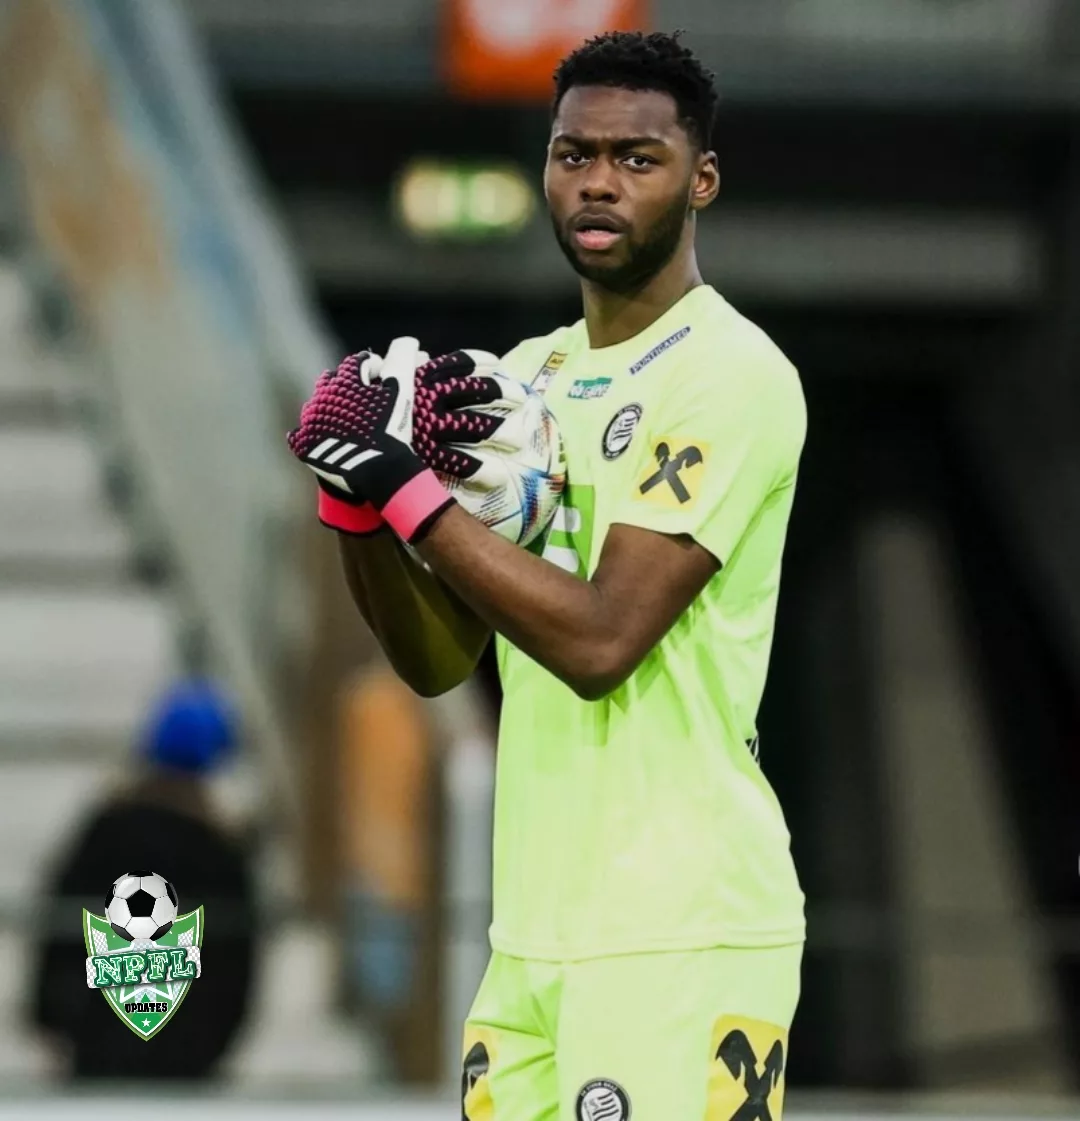 Arthur Okonkwo Expresses Interest in becoming England's first choice goalkeeper